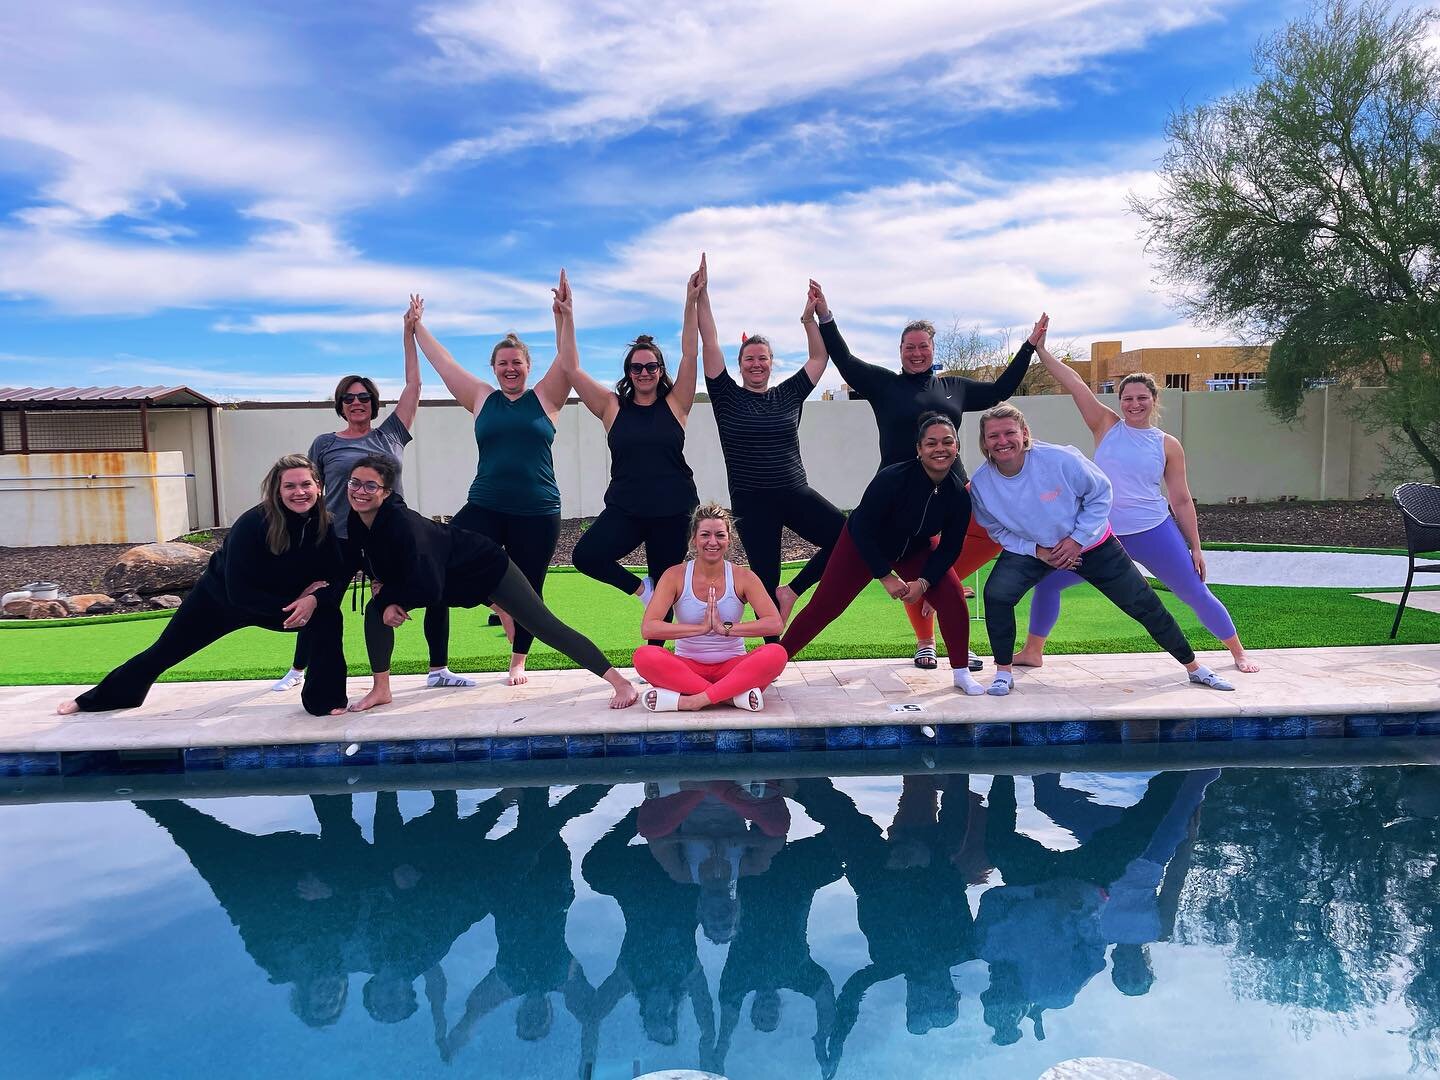 Love a fun mini photo shoot after a connective yoga session with the bachelorette and her crew!
 
It&rsquo;s so important to take the time to experience, restorative rest. 
Many bachelorette parties miss out on that key component, and instead, choose